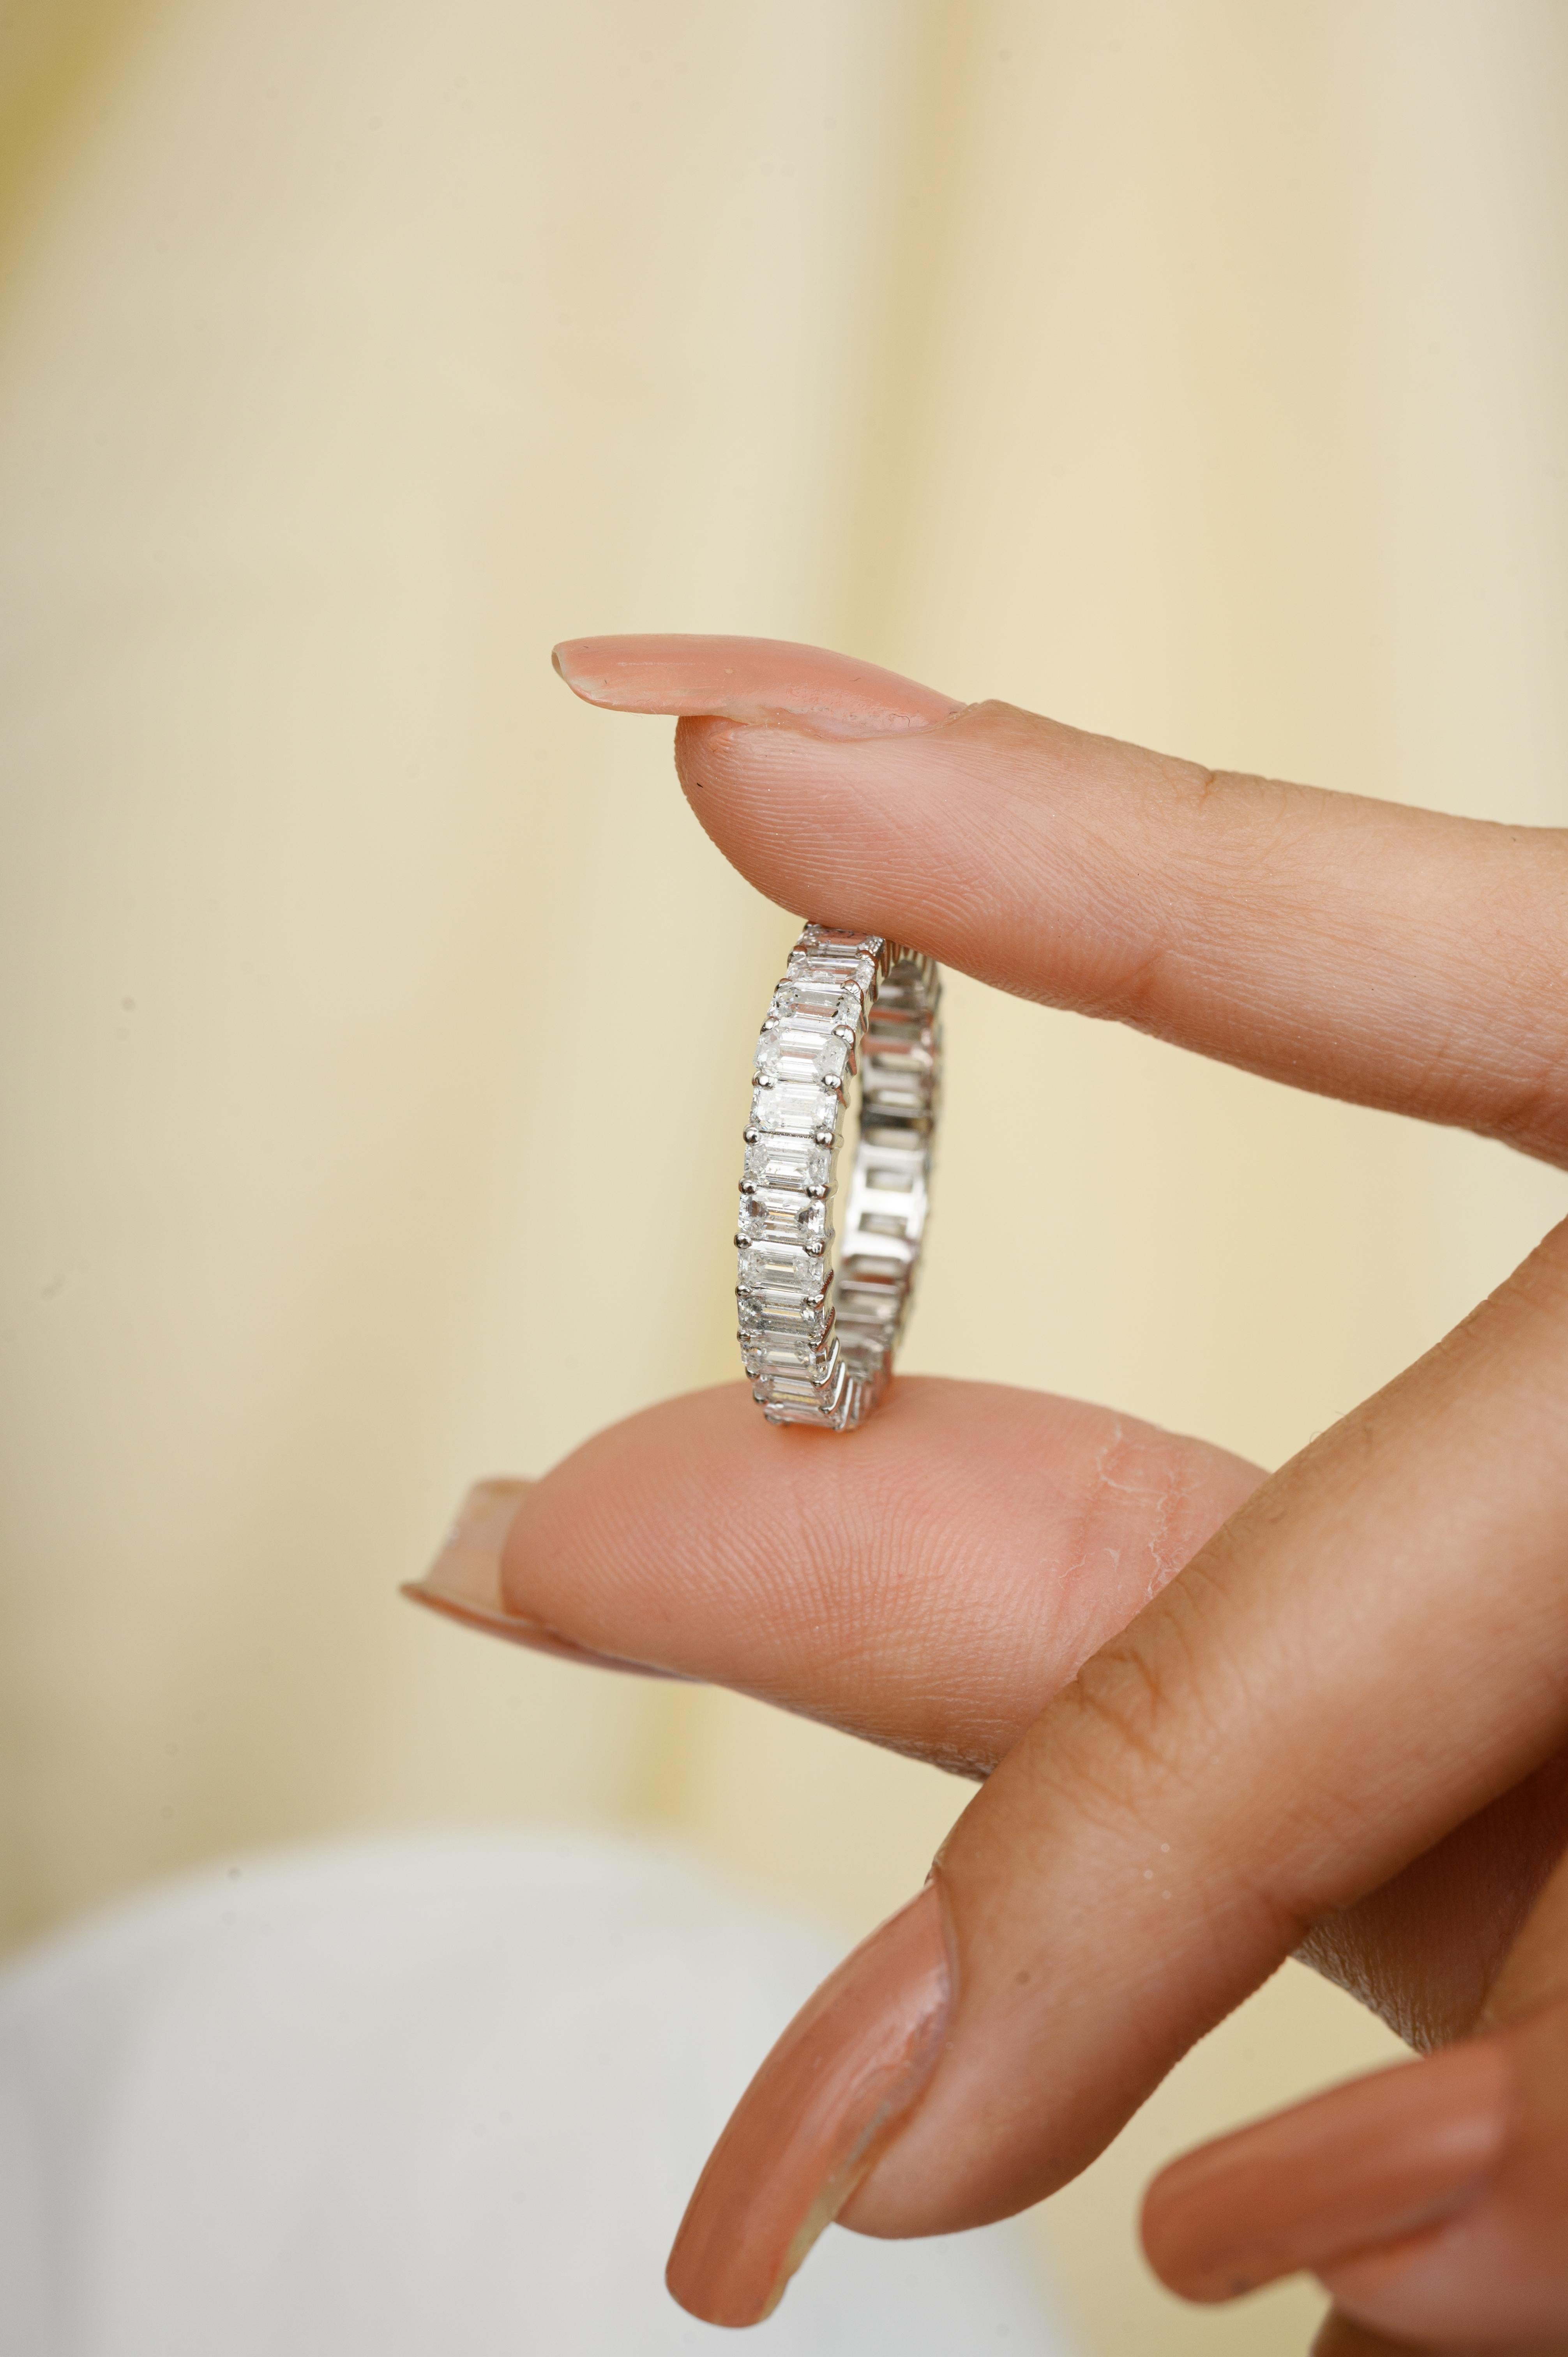 For Sale:  2.86 Carat Emerald Cut Diamond Eternity Band Ring in 14k Solid White Gold 4